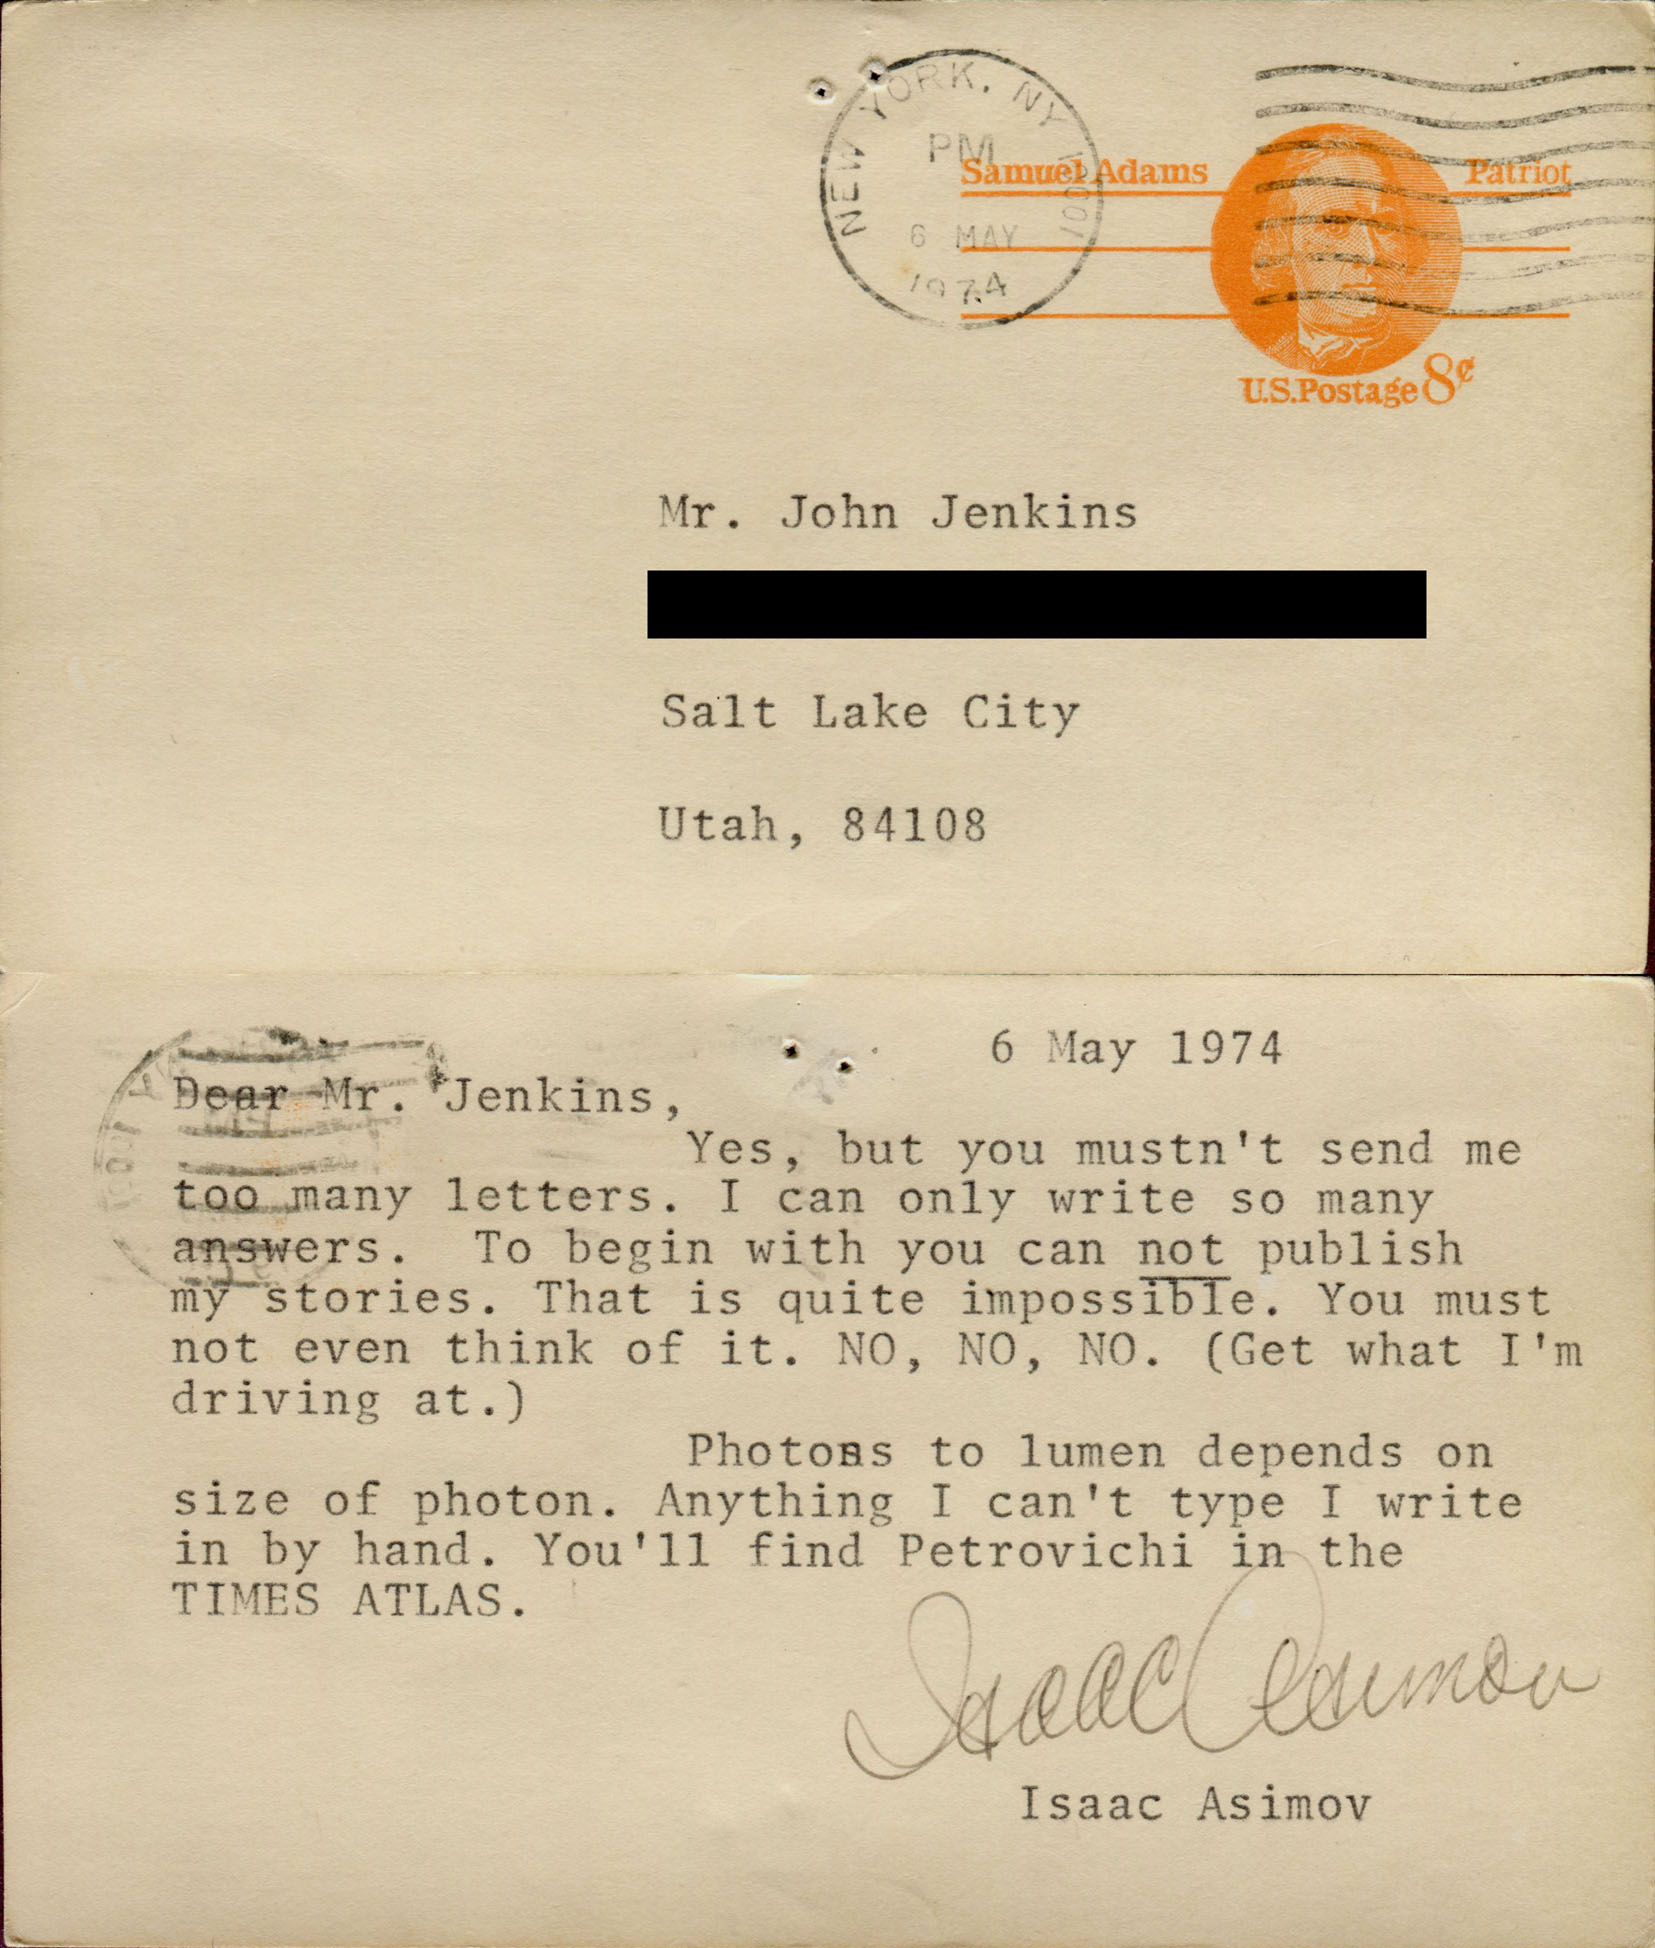 6 May 1974. Dear Mr. Jenkins, Yes, but you mustn't send me too many letters. I can only write so many answers. To begin with you can *not* publish my stories. That is quite impossible. You must not even think of it. NO, NO, , NO. (Get what I'm driving at.) Photons to lumen depends on size of photon. Anything I can't type I write in by hand. You'll find Petrovichi in the TIMES ATLAS. Isaac Asimov